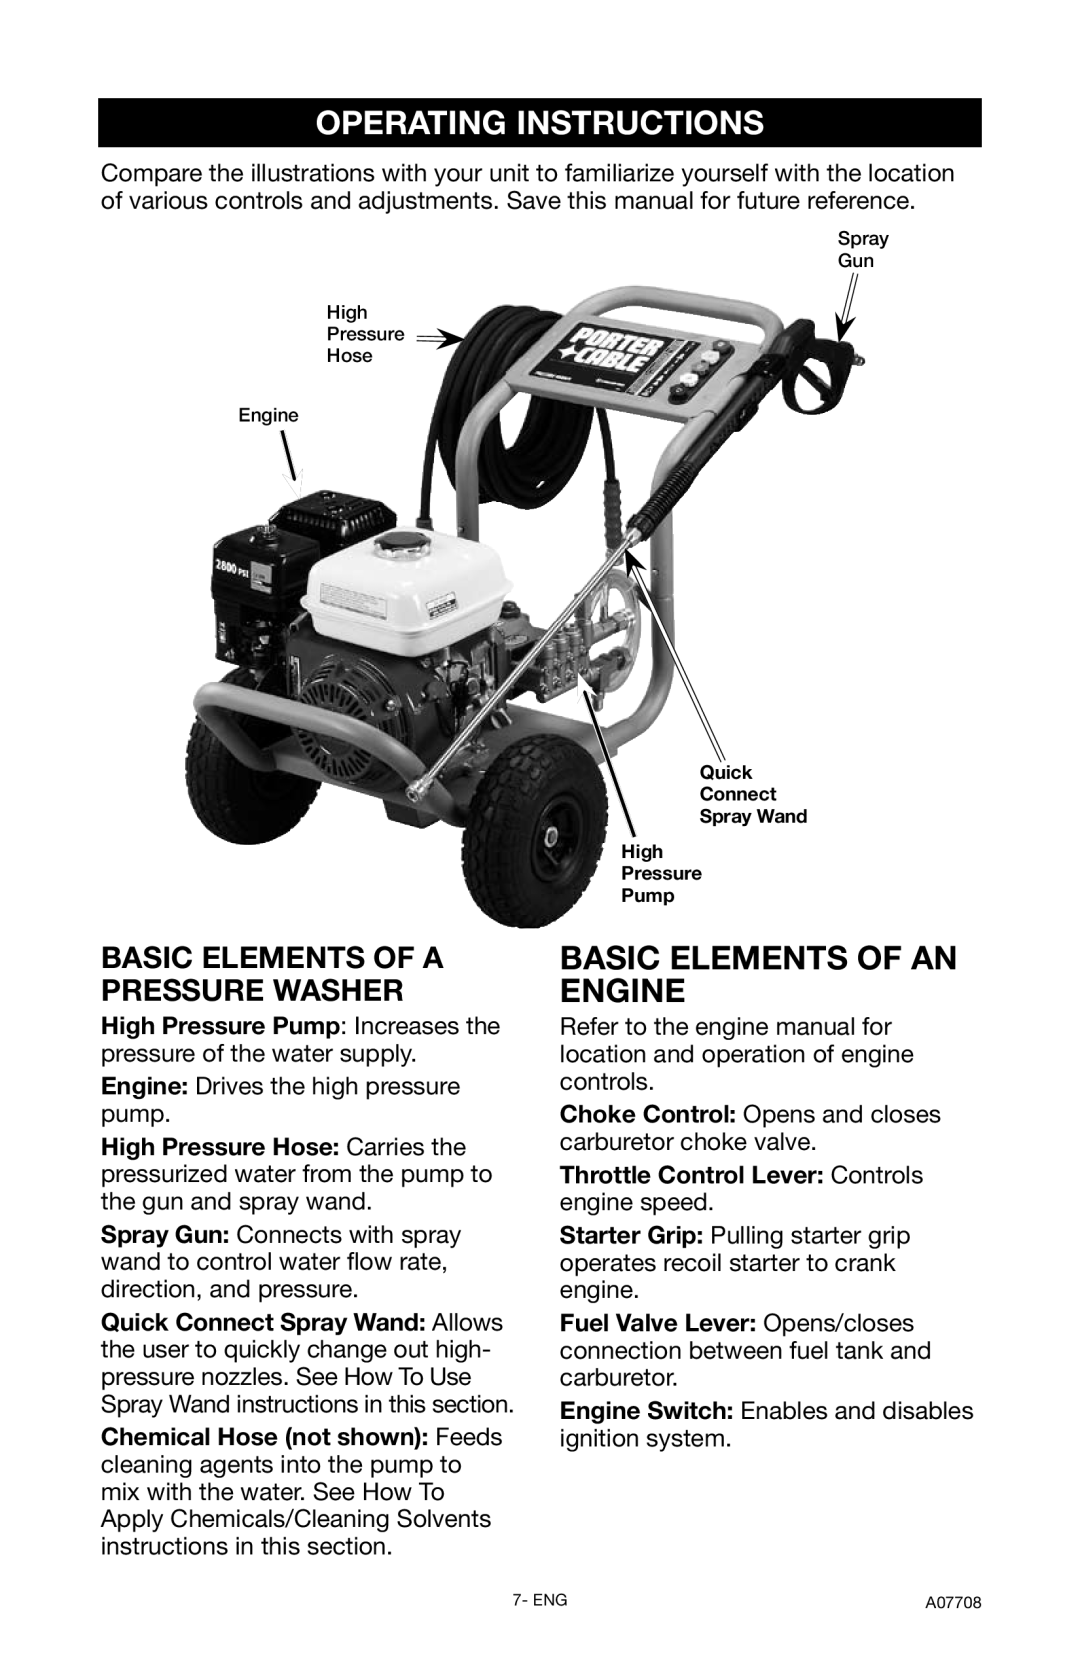 Porter-Cable A07708-0412-0 Operating Instructions, Basic Elements Of A Pressure Washer, Basic Elements Of An Engine 